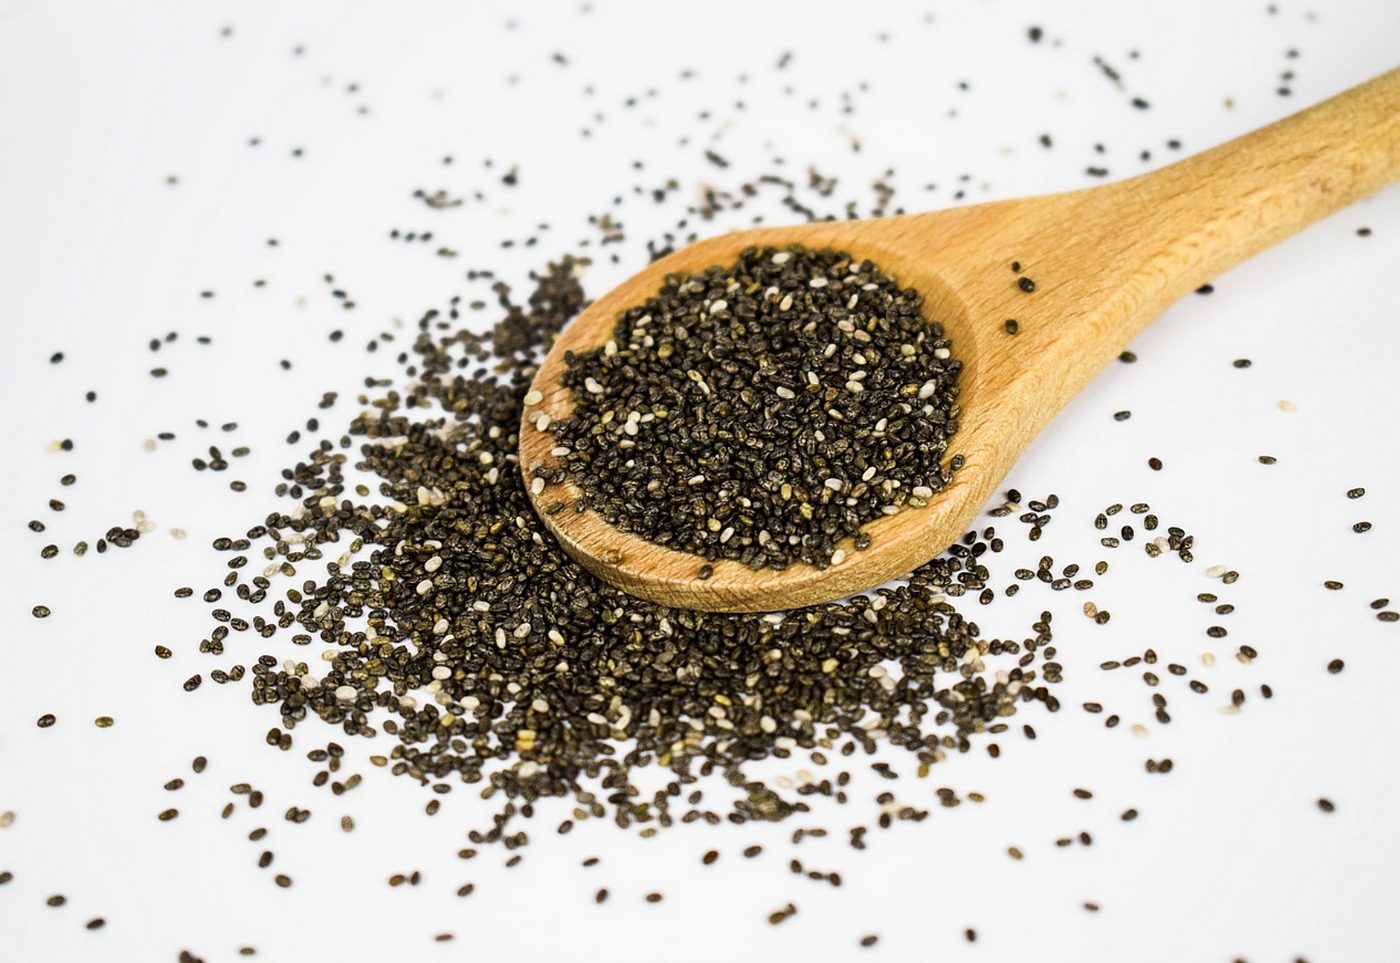 Sesame Seeds Benefits, Nutrition, Allergy, Side Effects - Dr. Axe